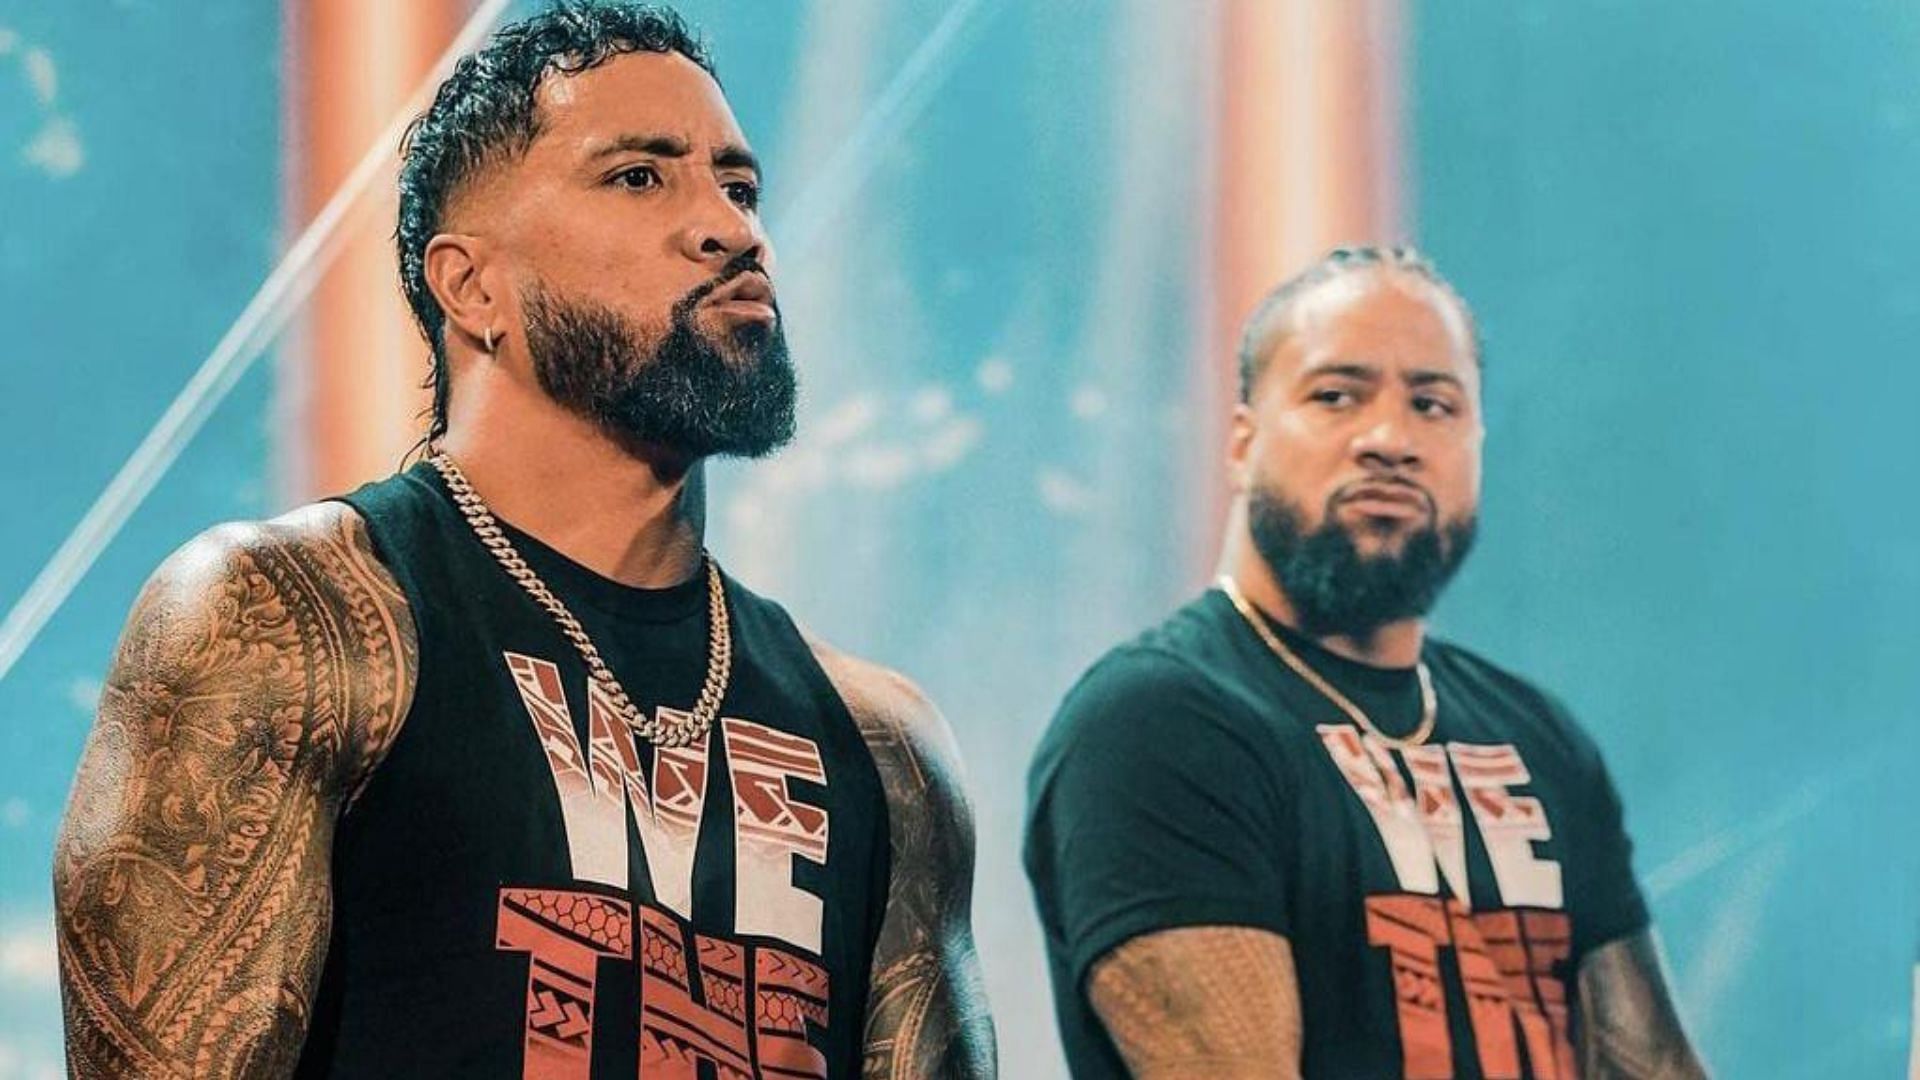 Which former team could be a threat to The Usos if they reunite?